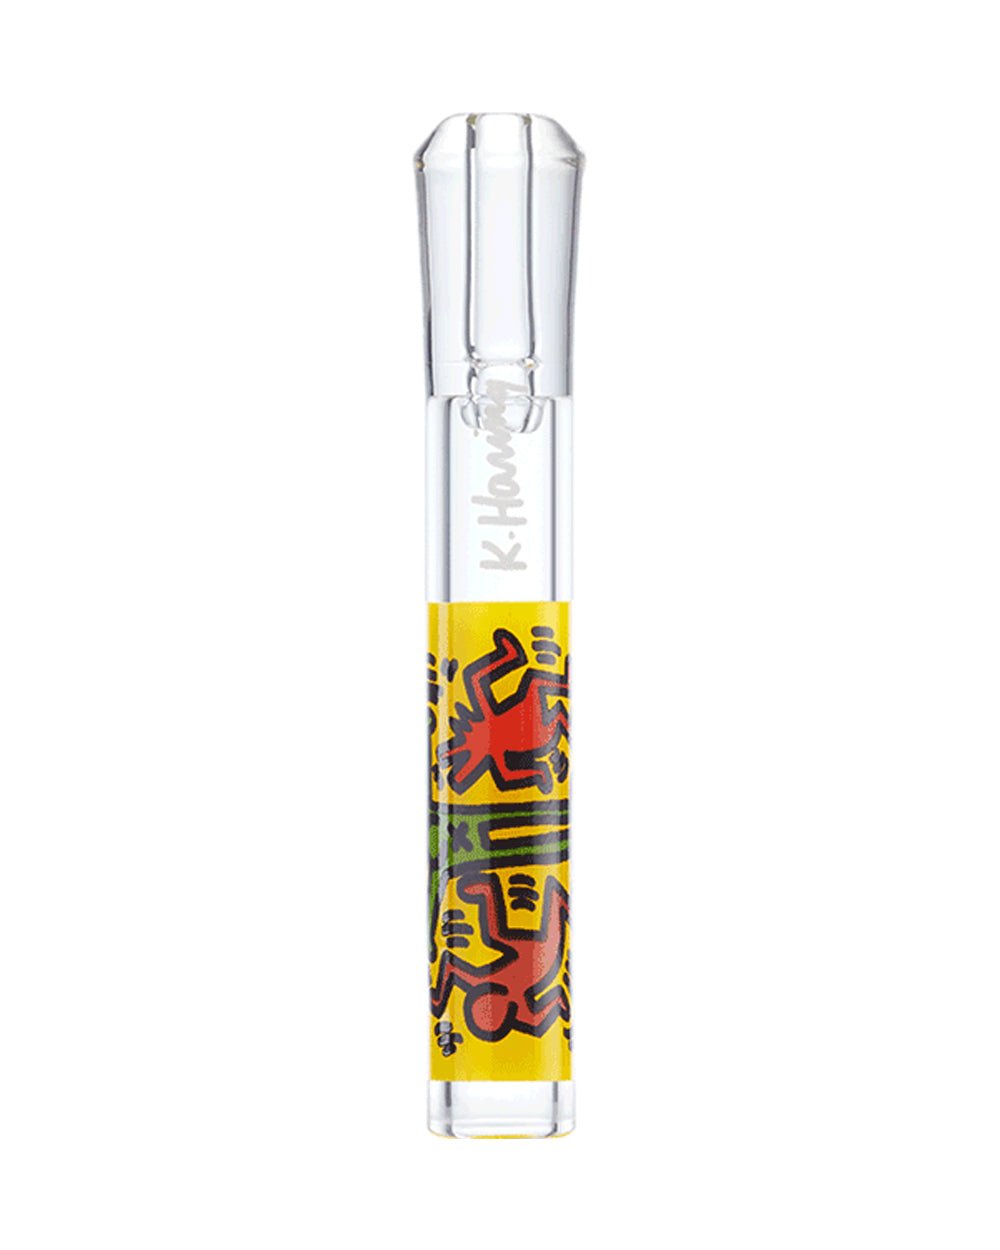 Keith Haring | Glass Taster Chillum Hand Pipe | 3in Long - Glass - Black & White - 12